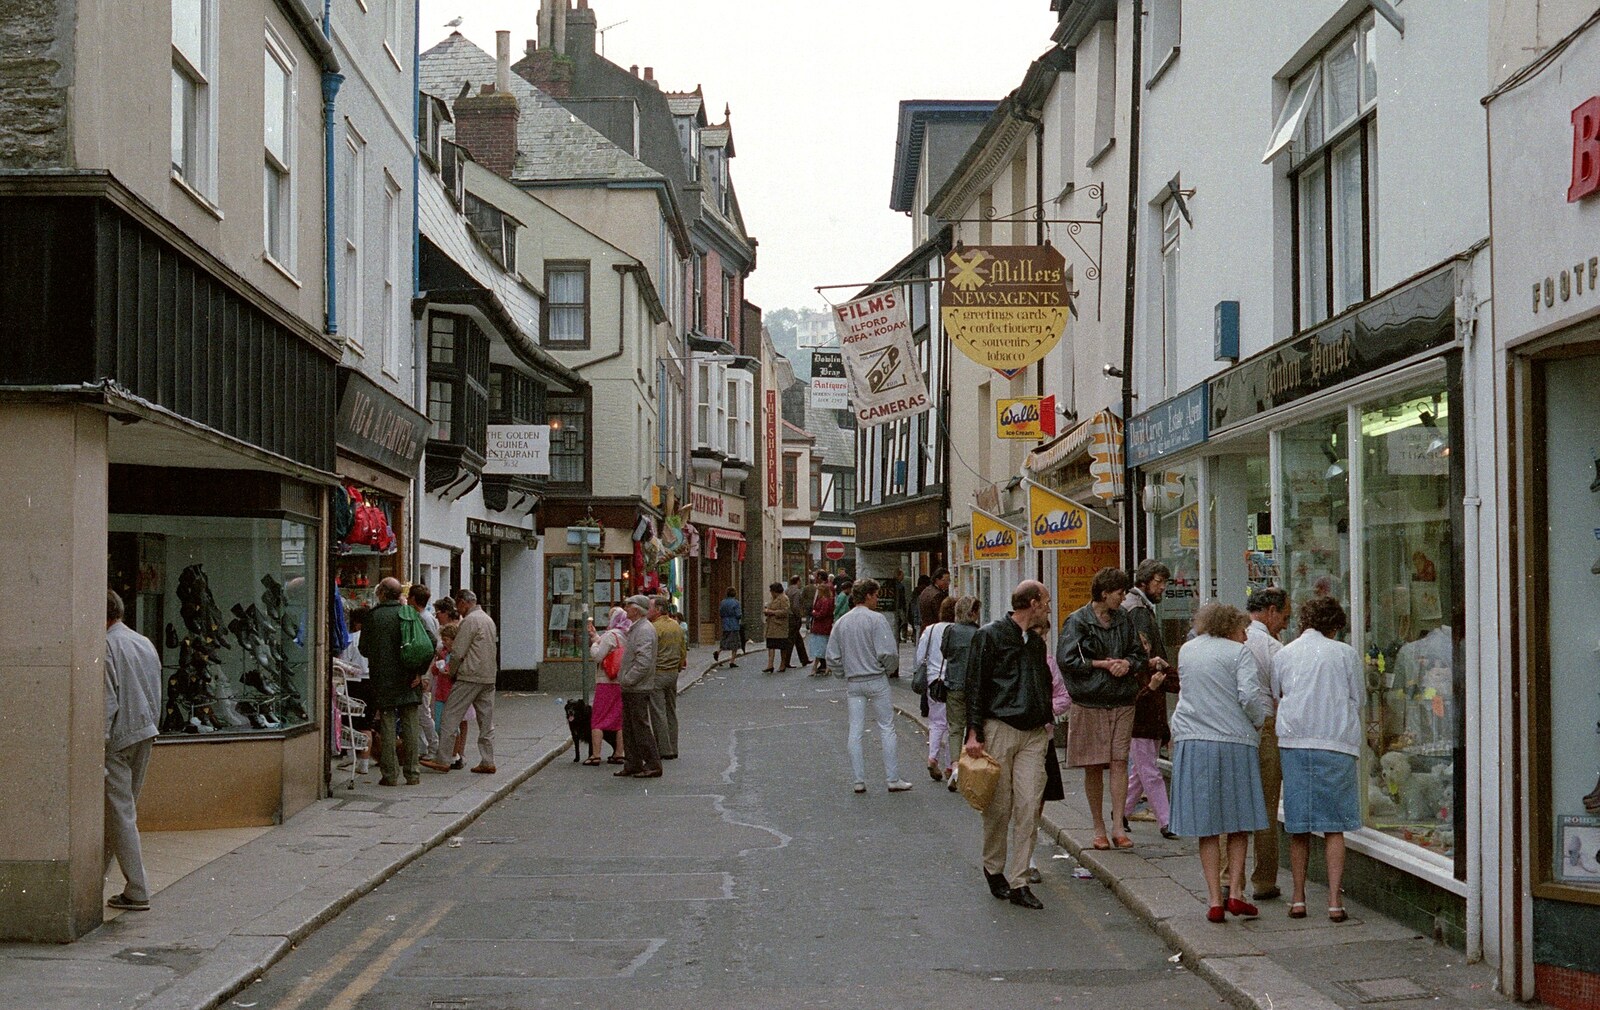 The main street in Looe, Cornwall from Uni: A Plymouth Hoe Kickabout, Plymouth, Devon - 20th October 1986